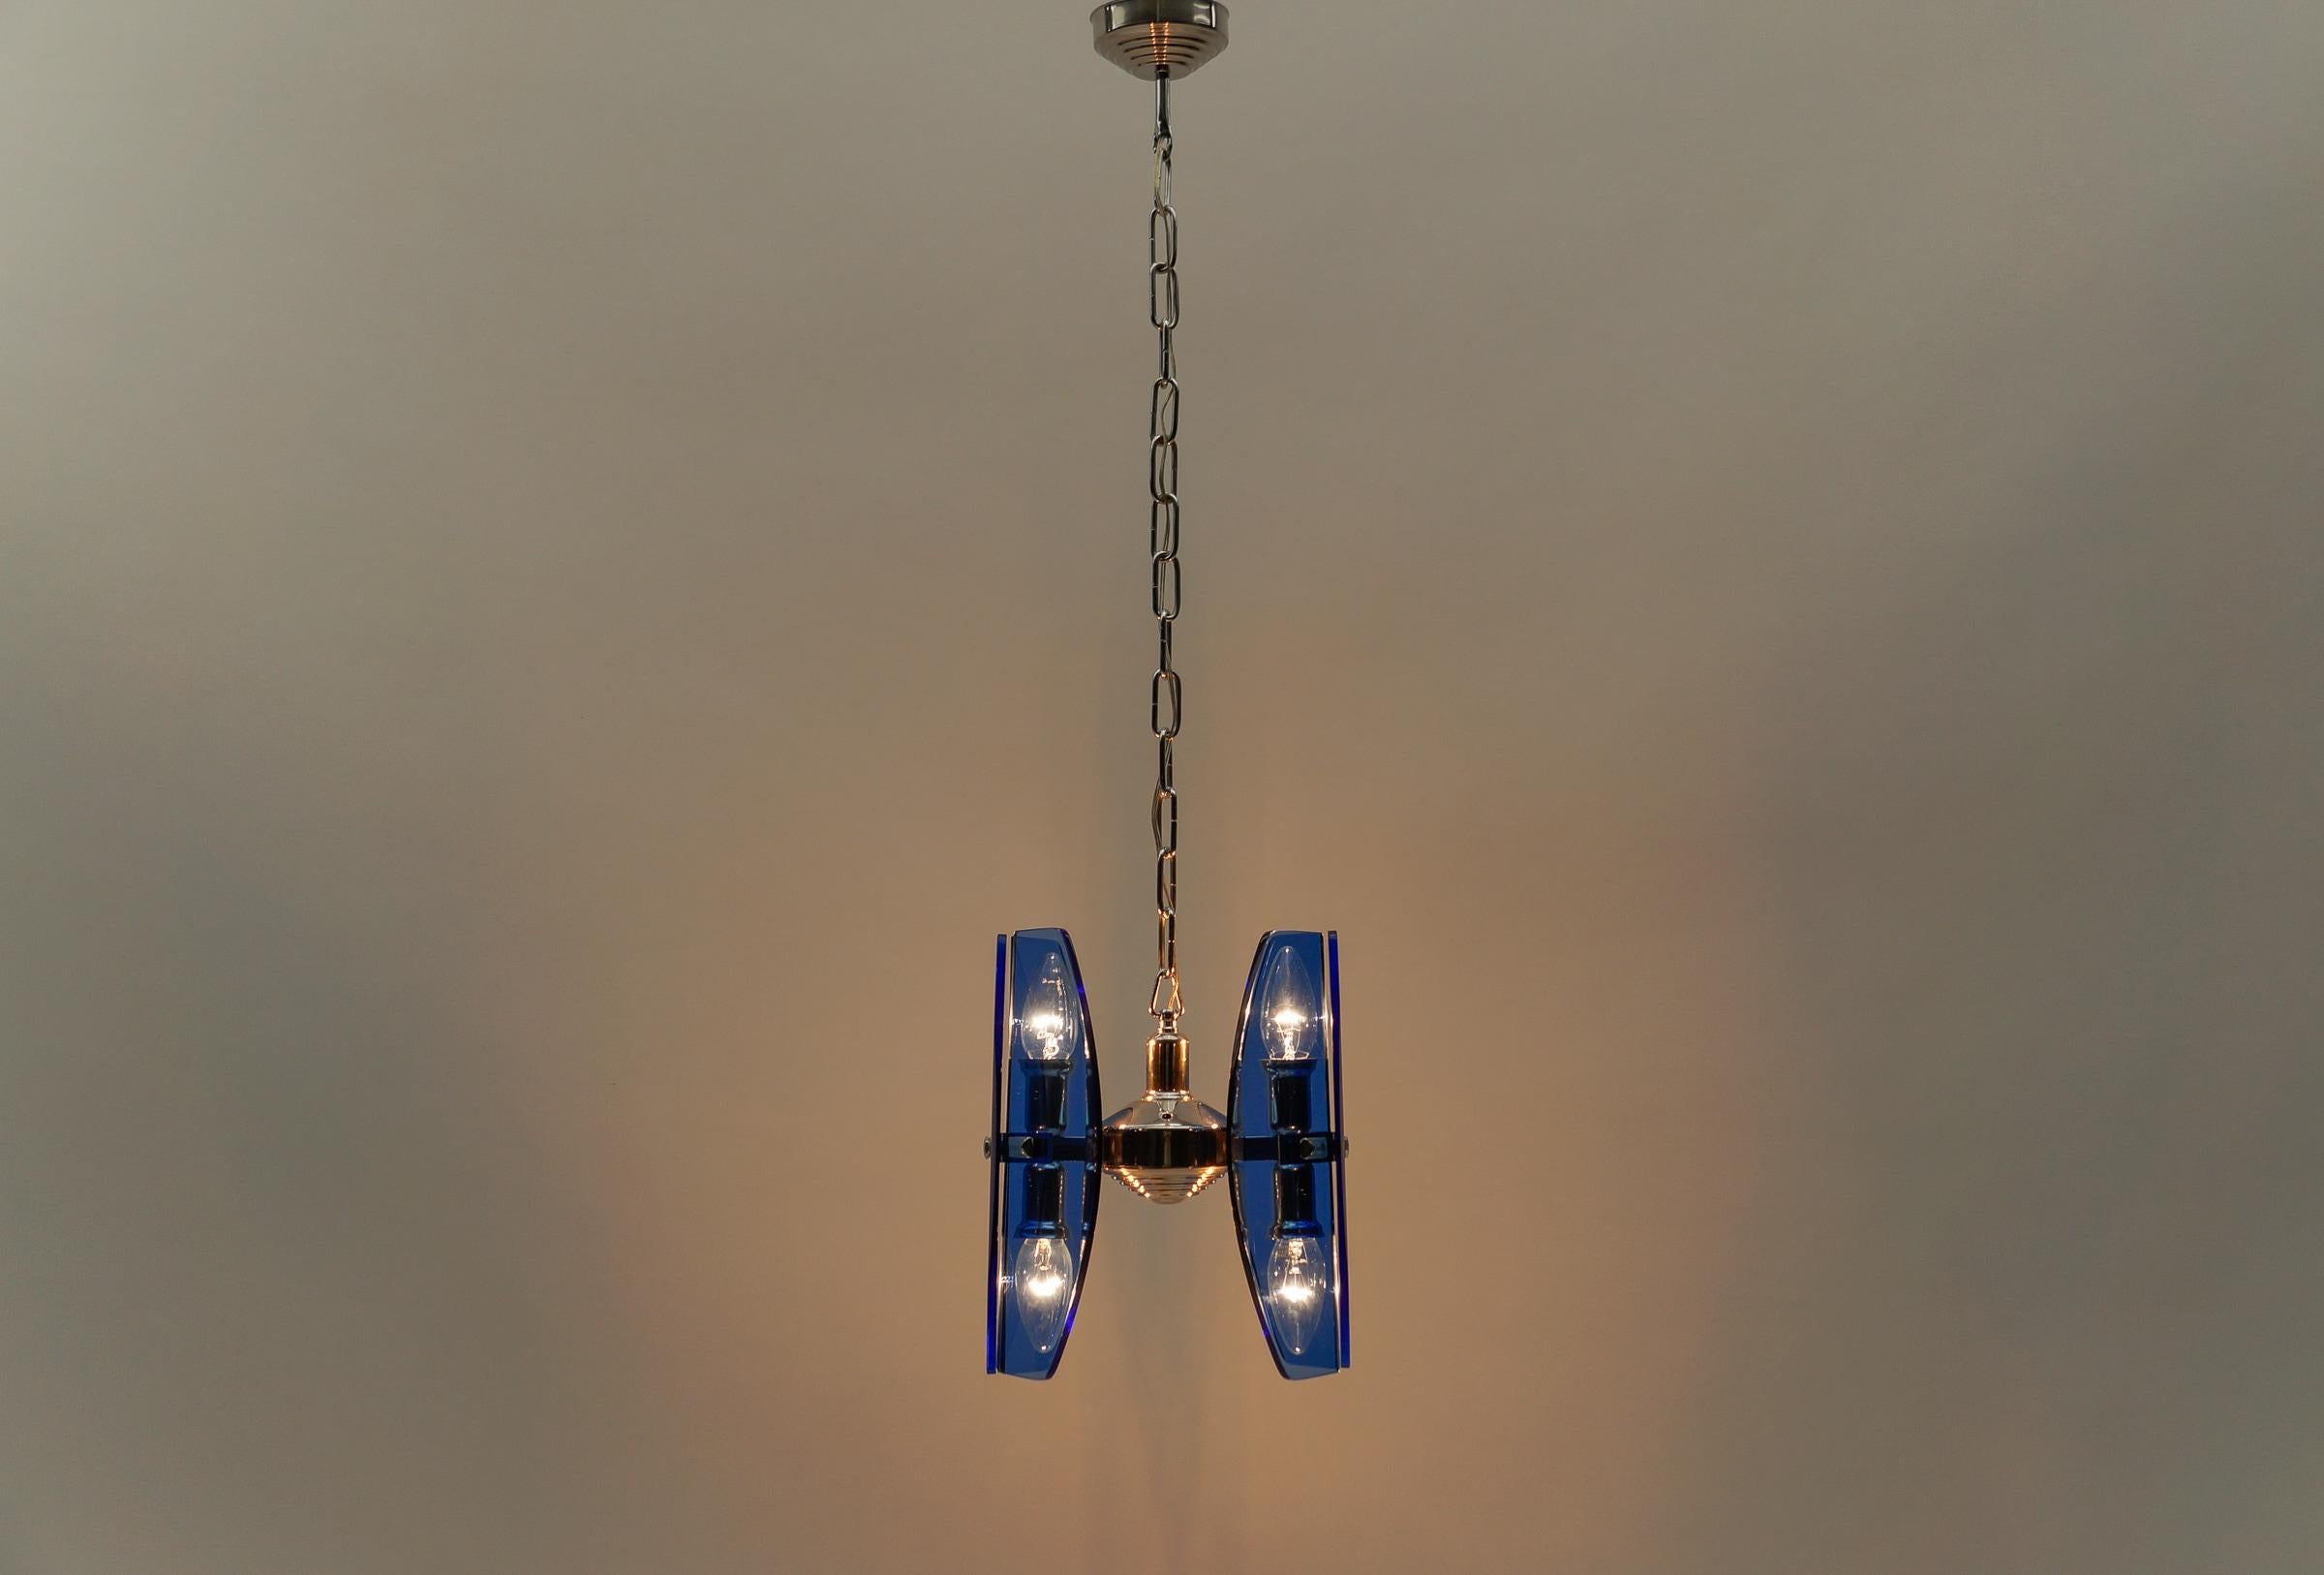 Italian 1. of 2 Mid-Century Modern Ceiling Lamp by Antonio Lupi for VECA Italy, 1960s For Sale